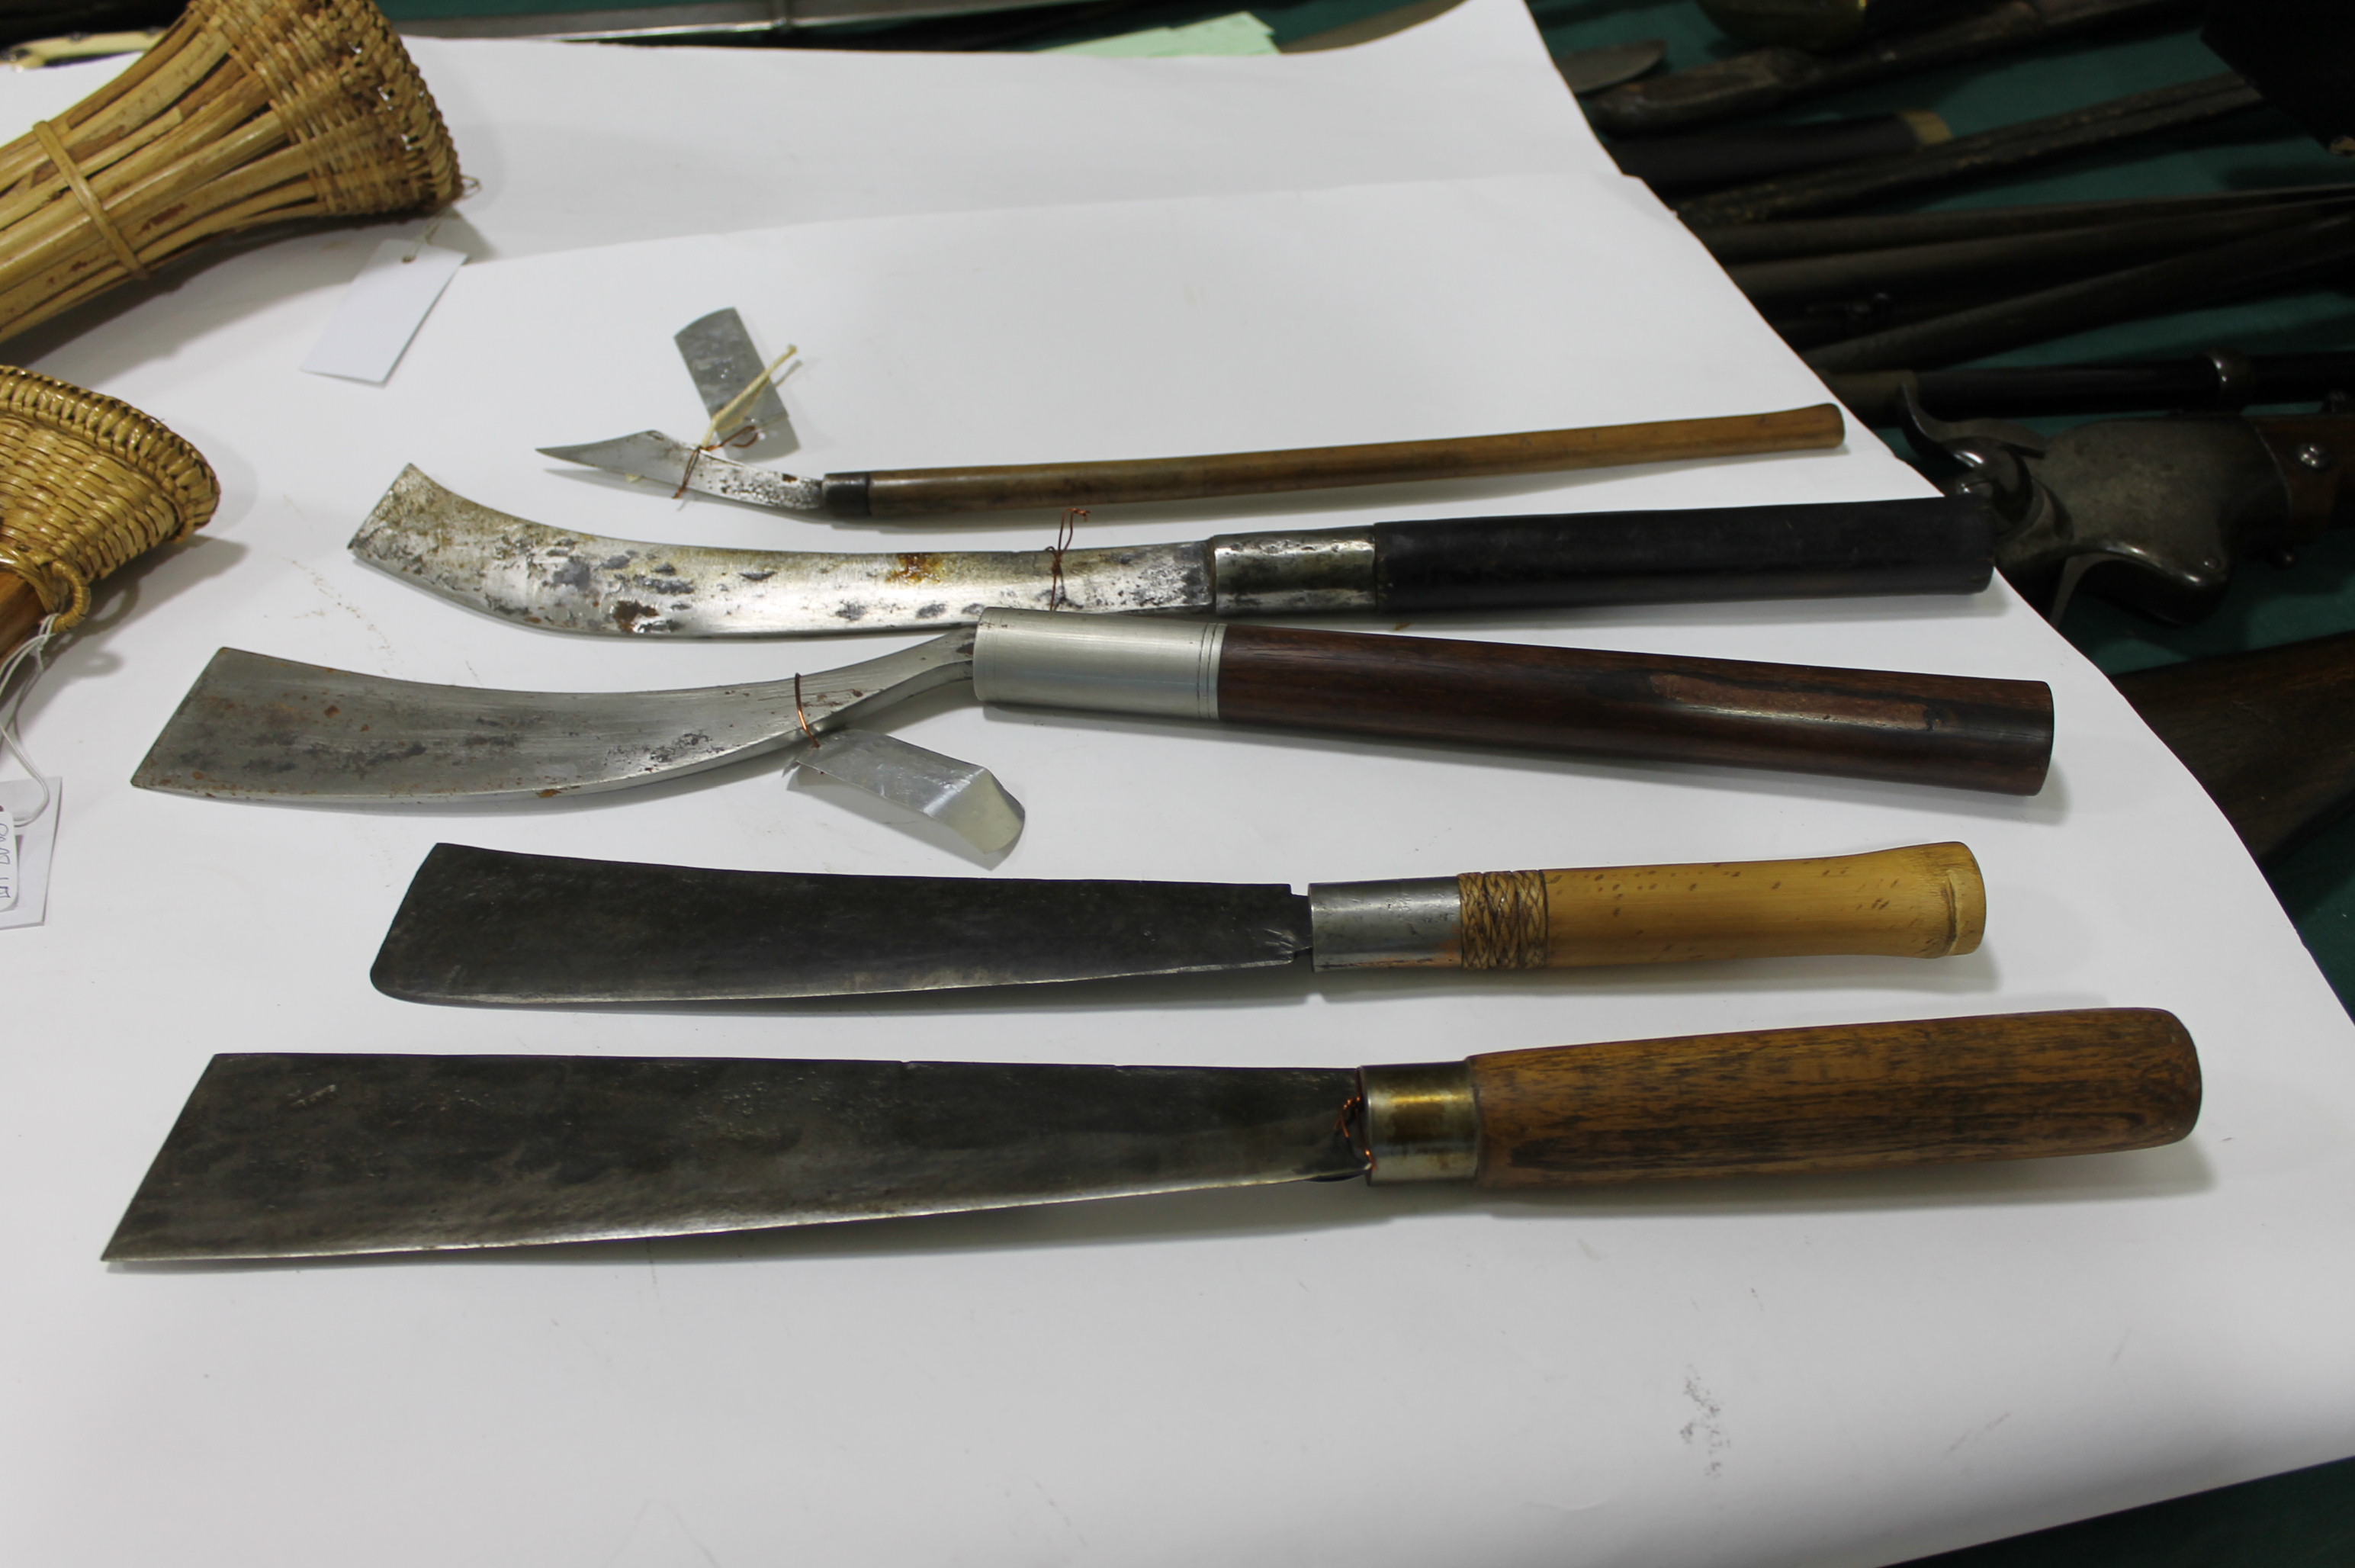 EASTERN KNIVES. Five Eastern knives including a Cambodian Machete style knife with a 10" blade, - Image 2 of 6